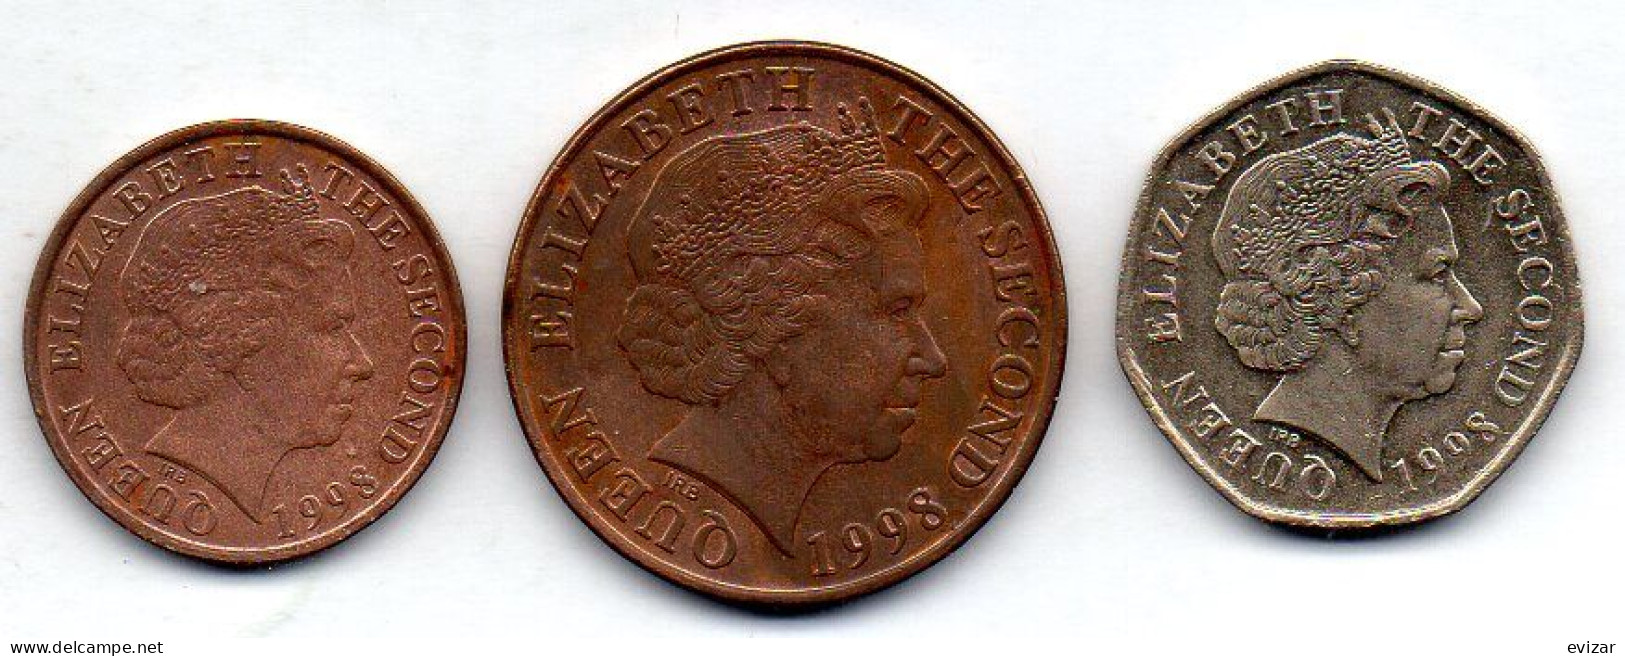 JERSEY, Set Of Three Coins 1, 2, 20 Pence, Copper, Copper-Nickel, Year 1998, KM # 103, 104, 107 - Jersey